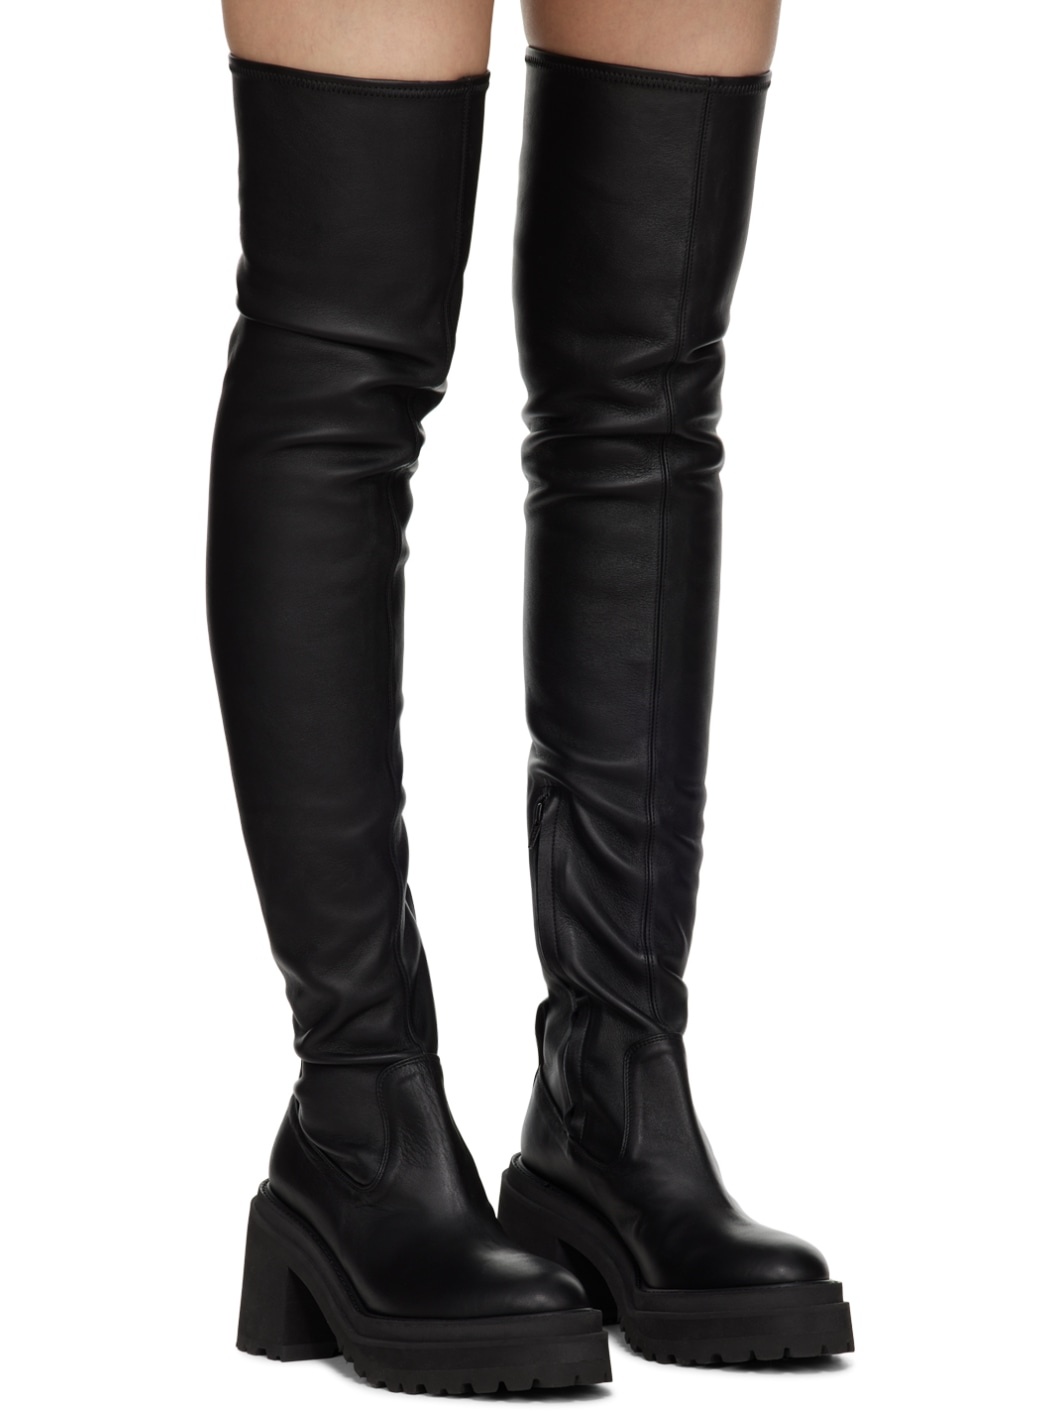 Black Leather Tall Boots - 4